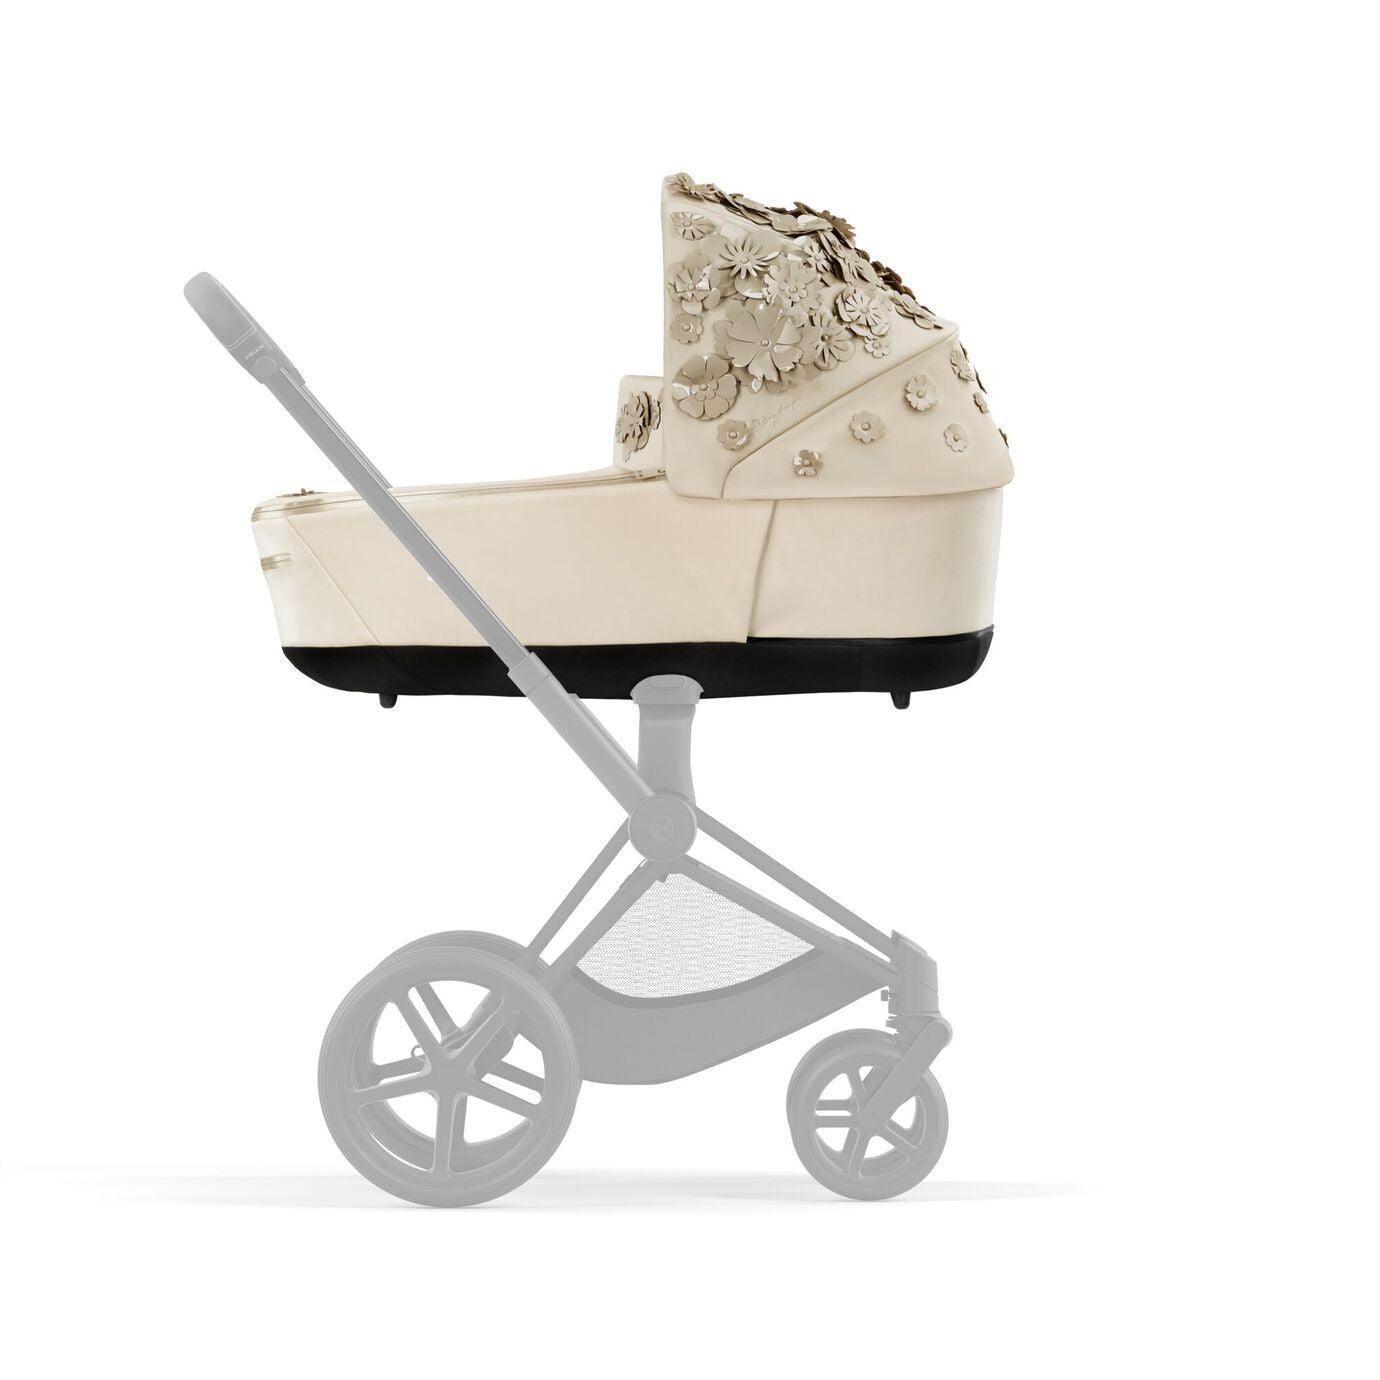 CYBEX - CYBEX Priam Cot Lux Carry Cot new Generation - Mari Kali Stores Cyprus